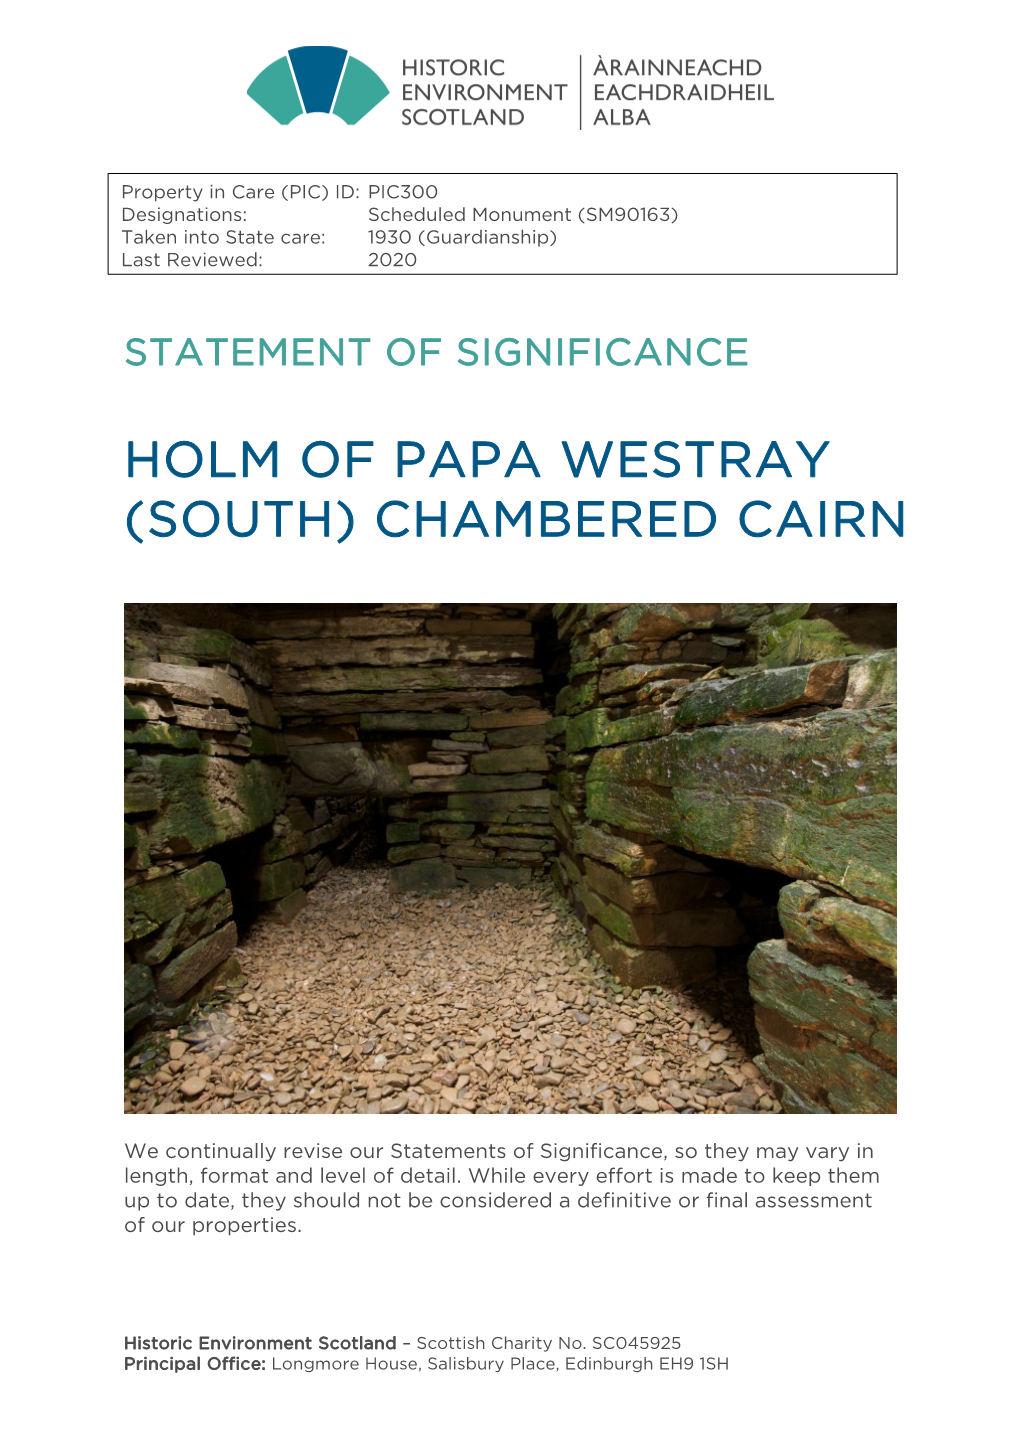 Holm of Papa Westray Chambered Cairn Statement of Significance